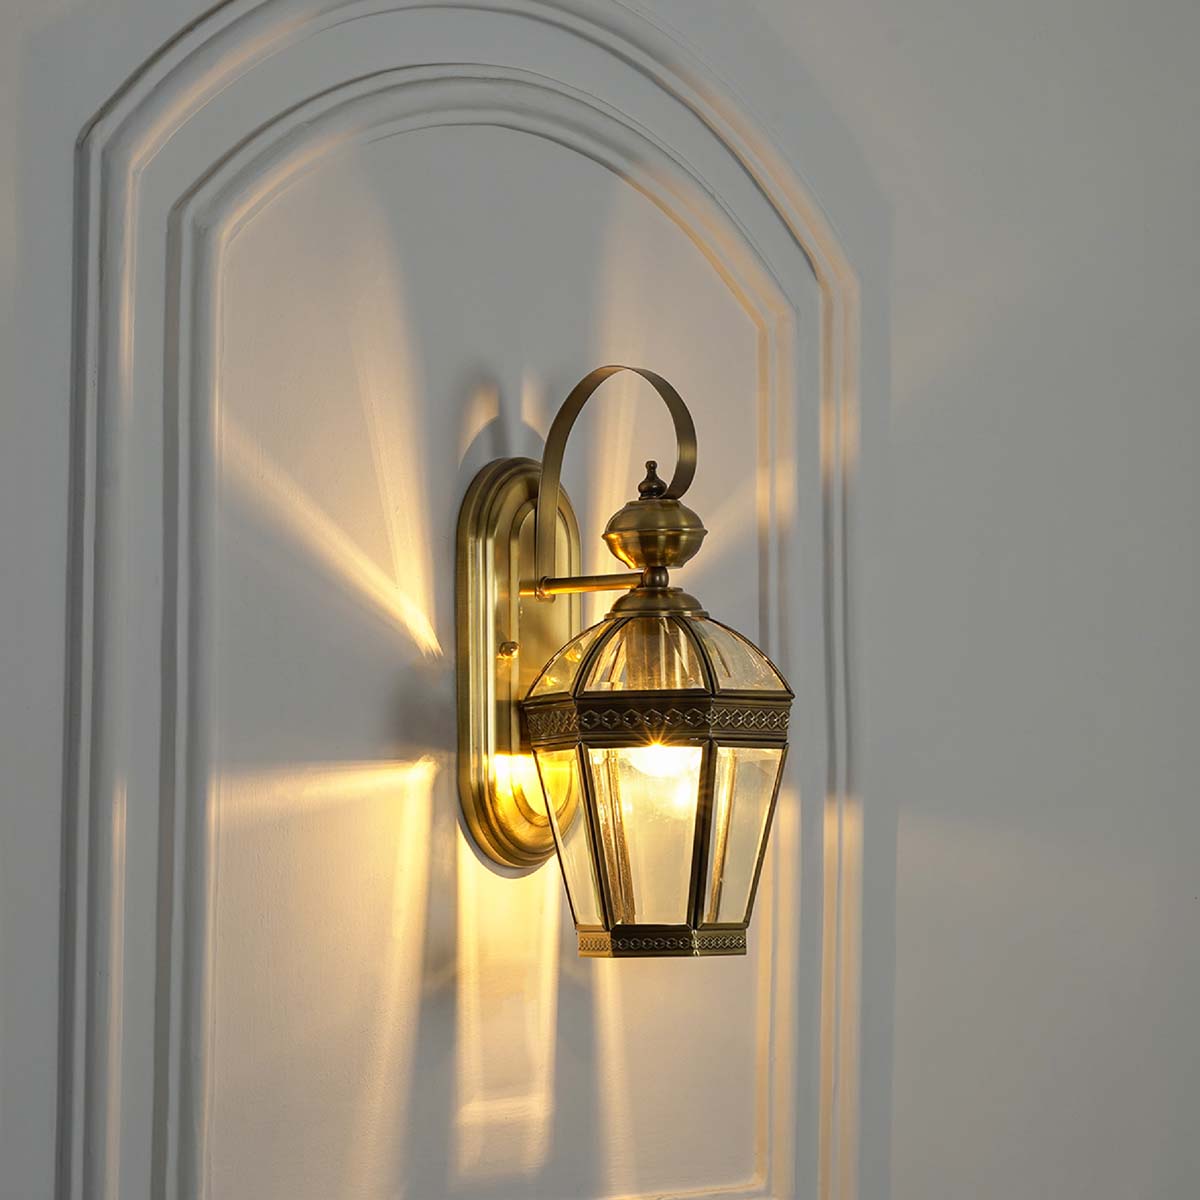 Thorton Classic Brass And Glass Wall Sconce